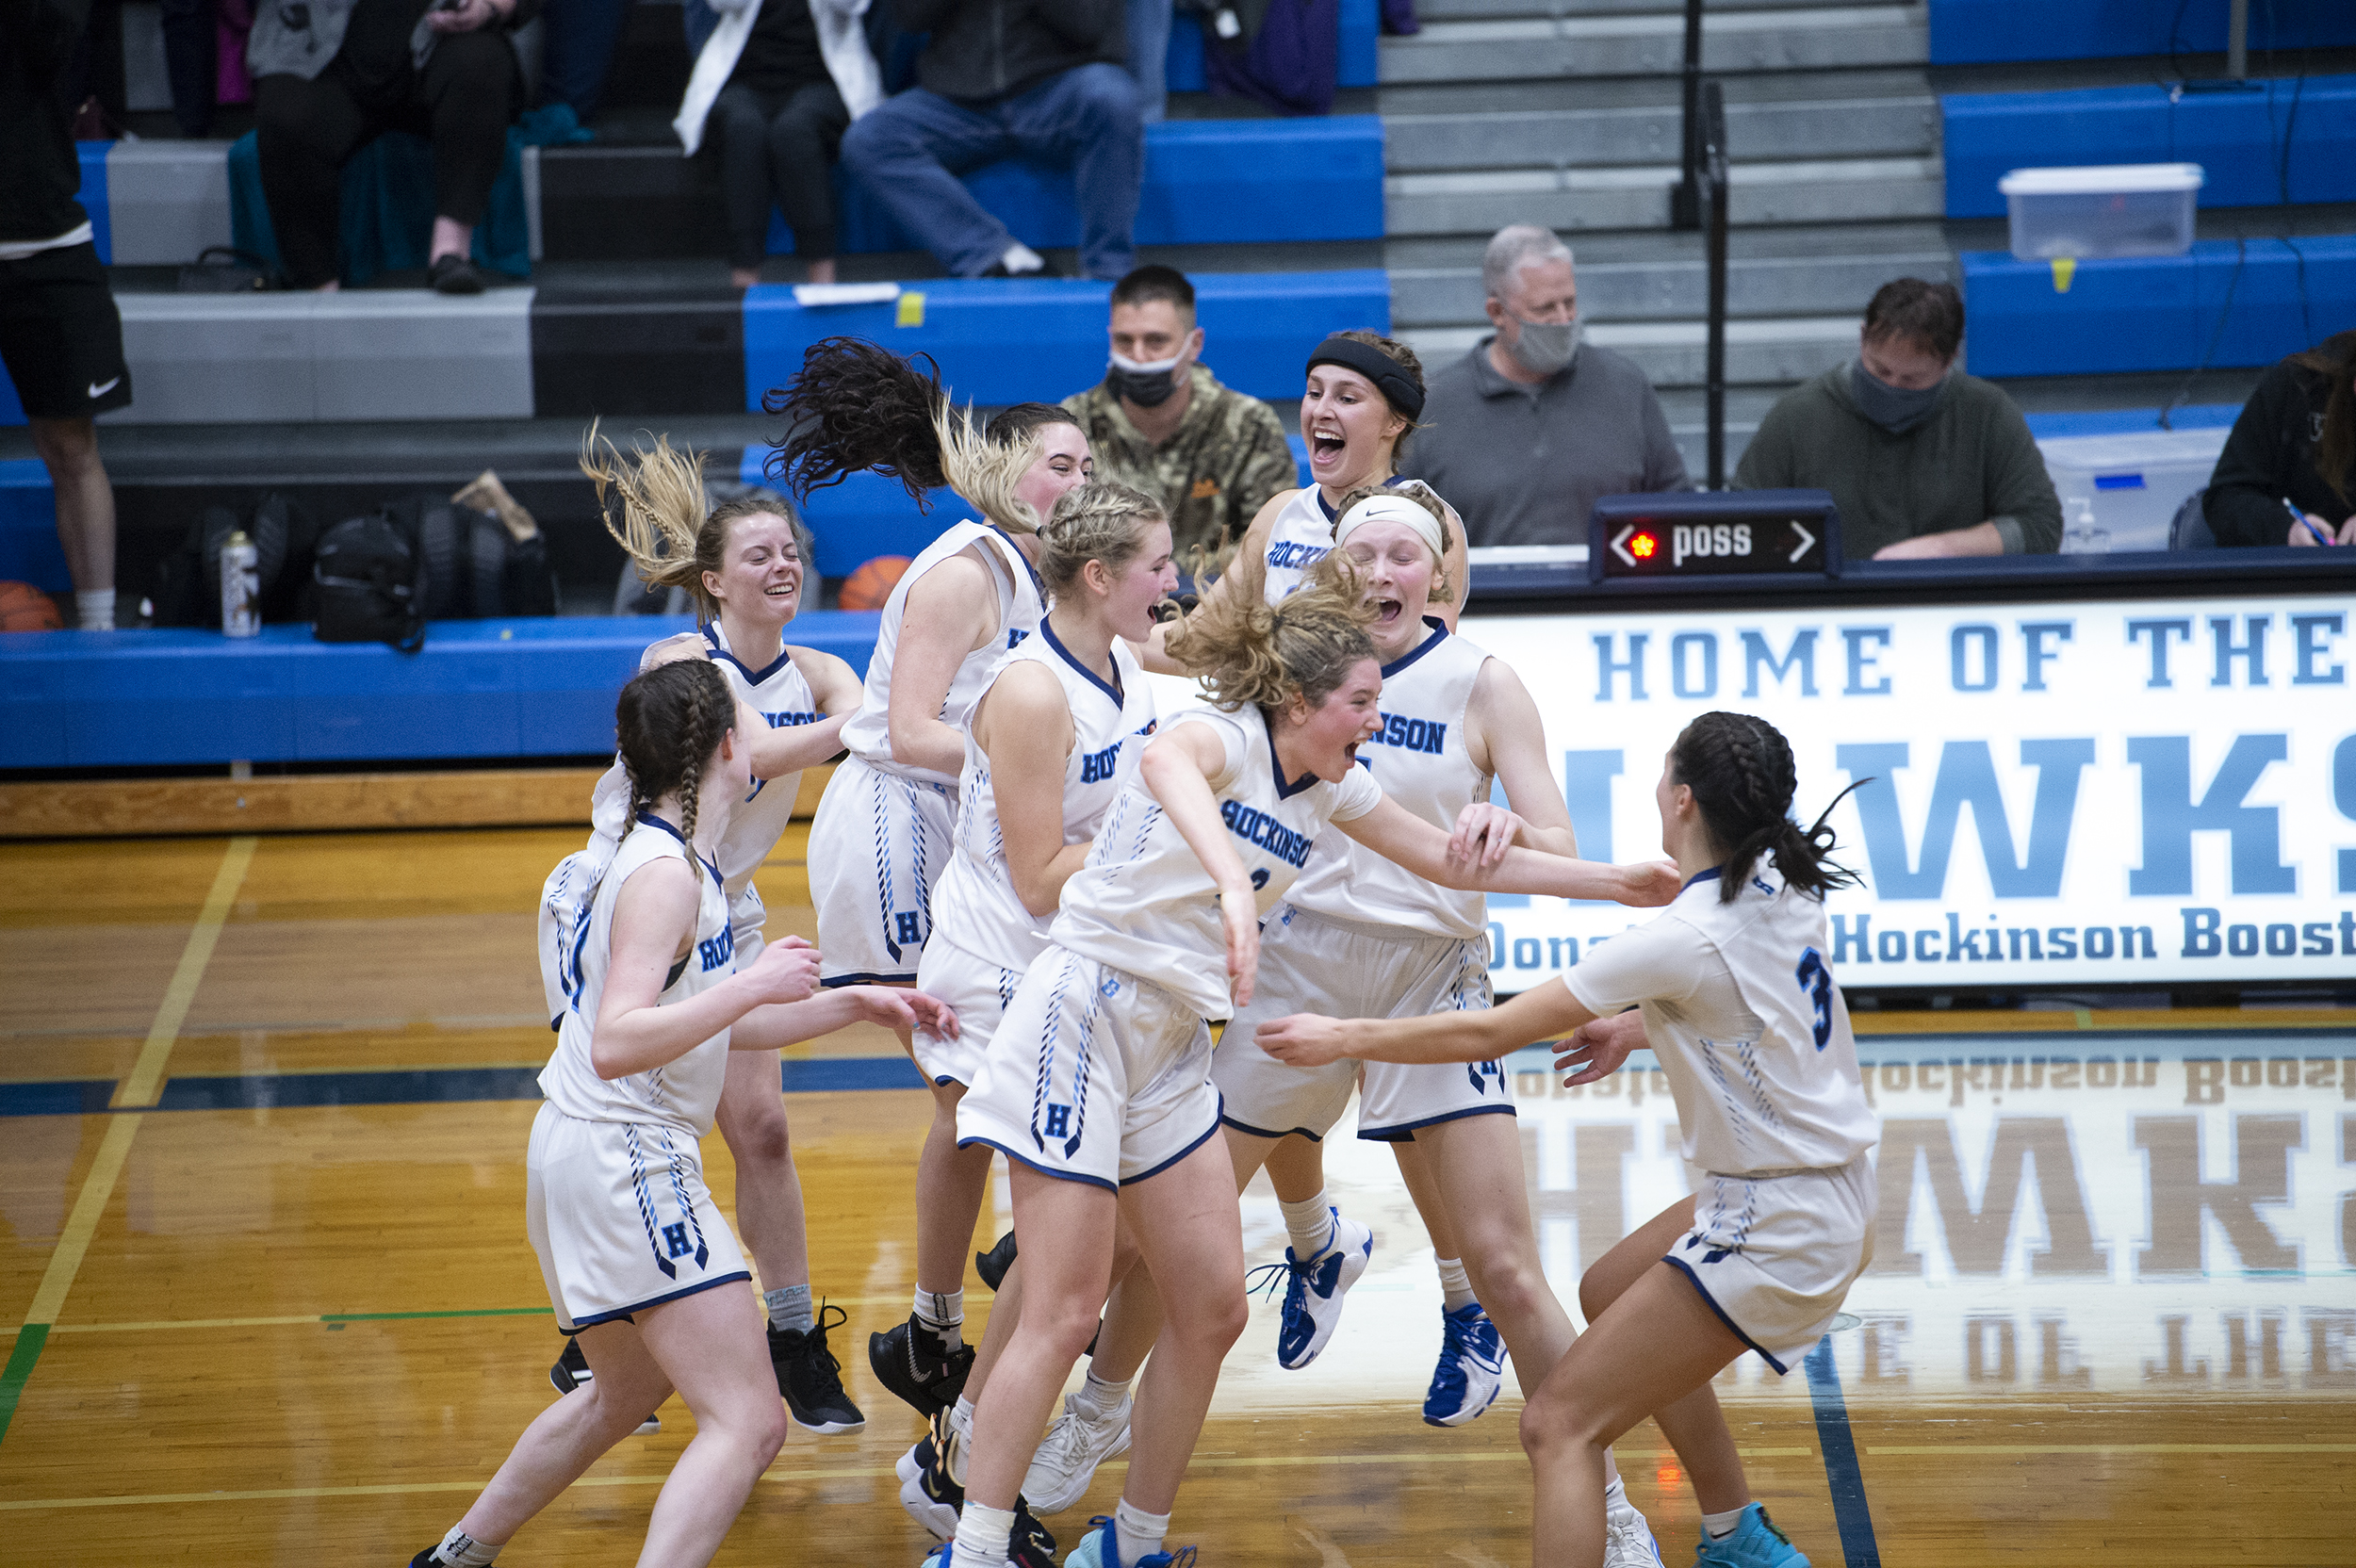 The Hockinson girls basketball players celebrate after their 58-53 win over Washougal on Wednesday, Feb.